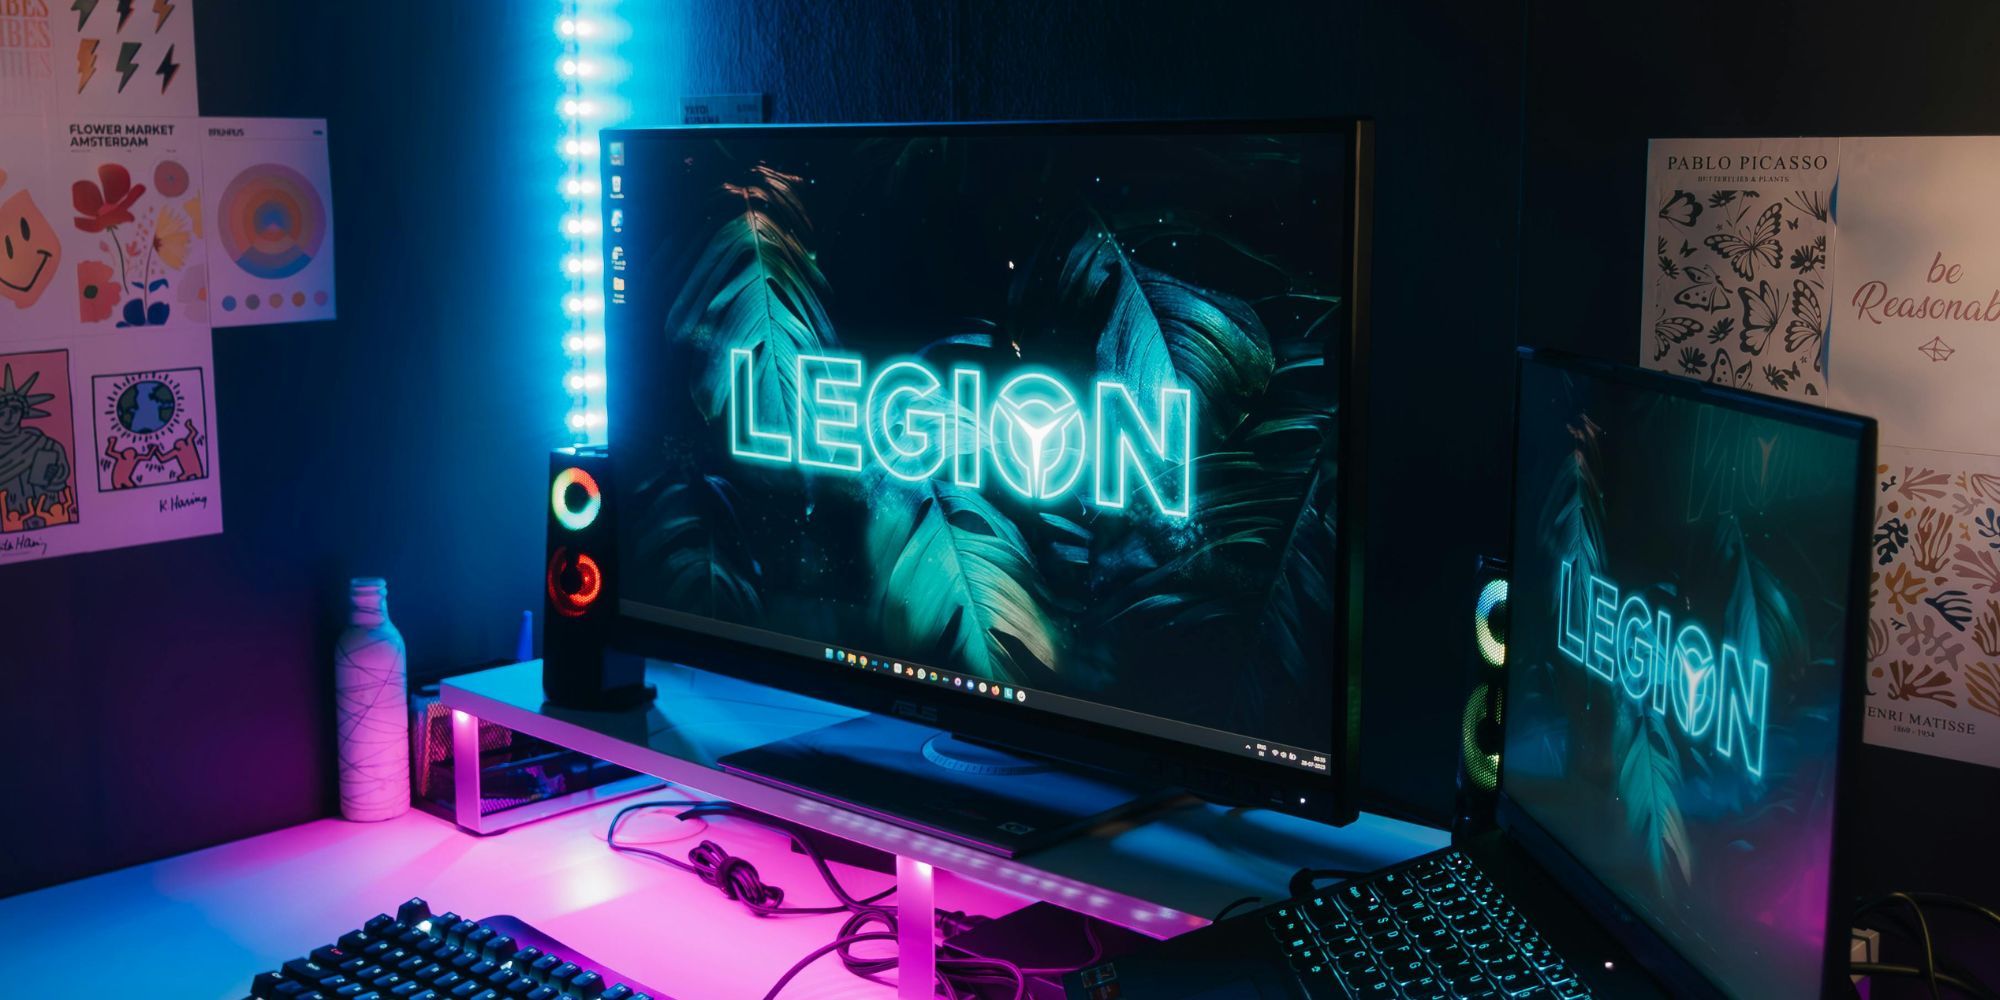 Gaming Monitor With Laptop And Speakers And RGB Speakers With Blue And Yellow Lighting Strips